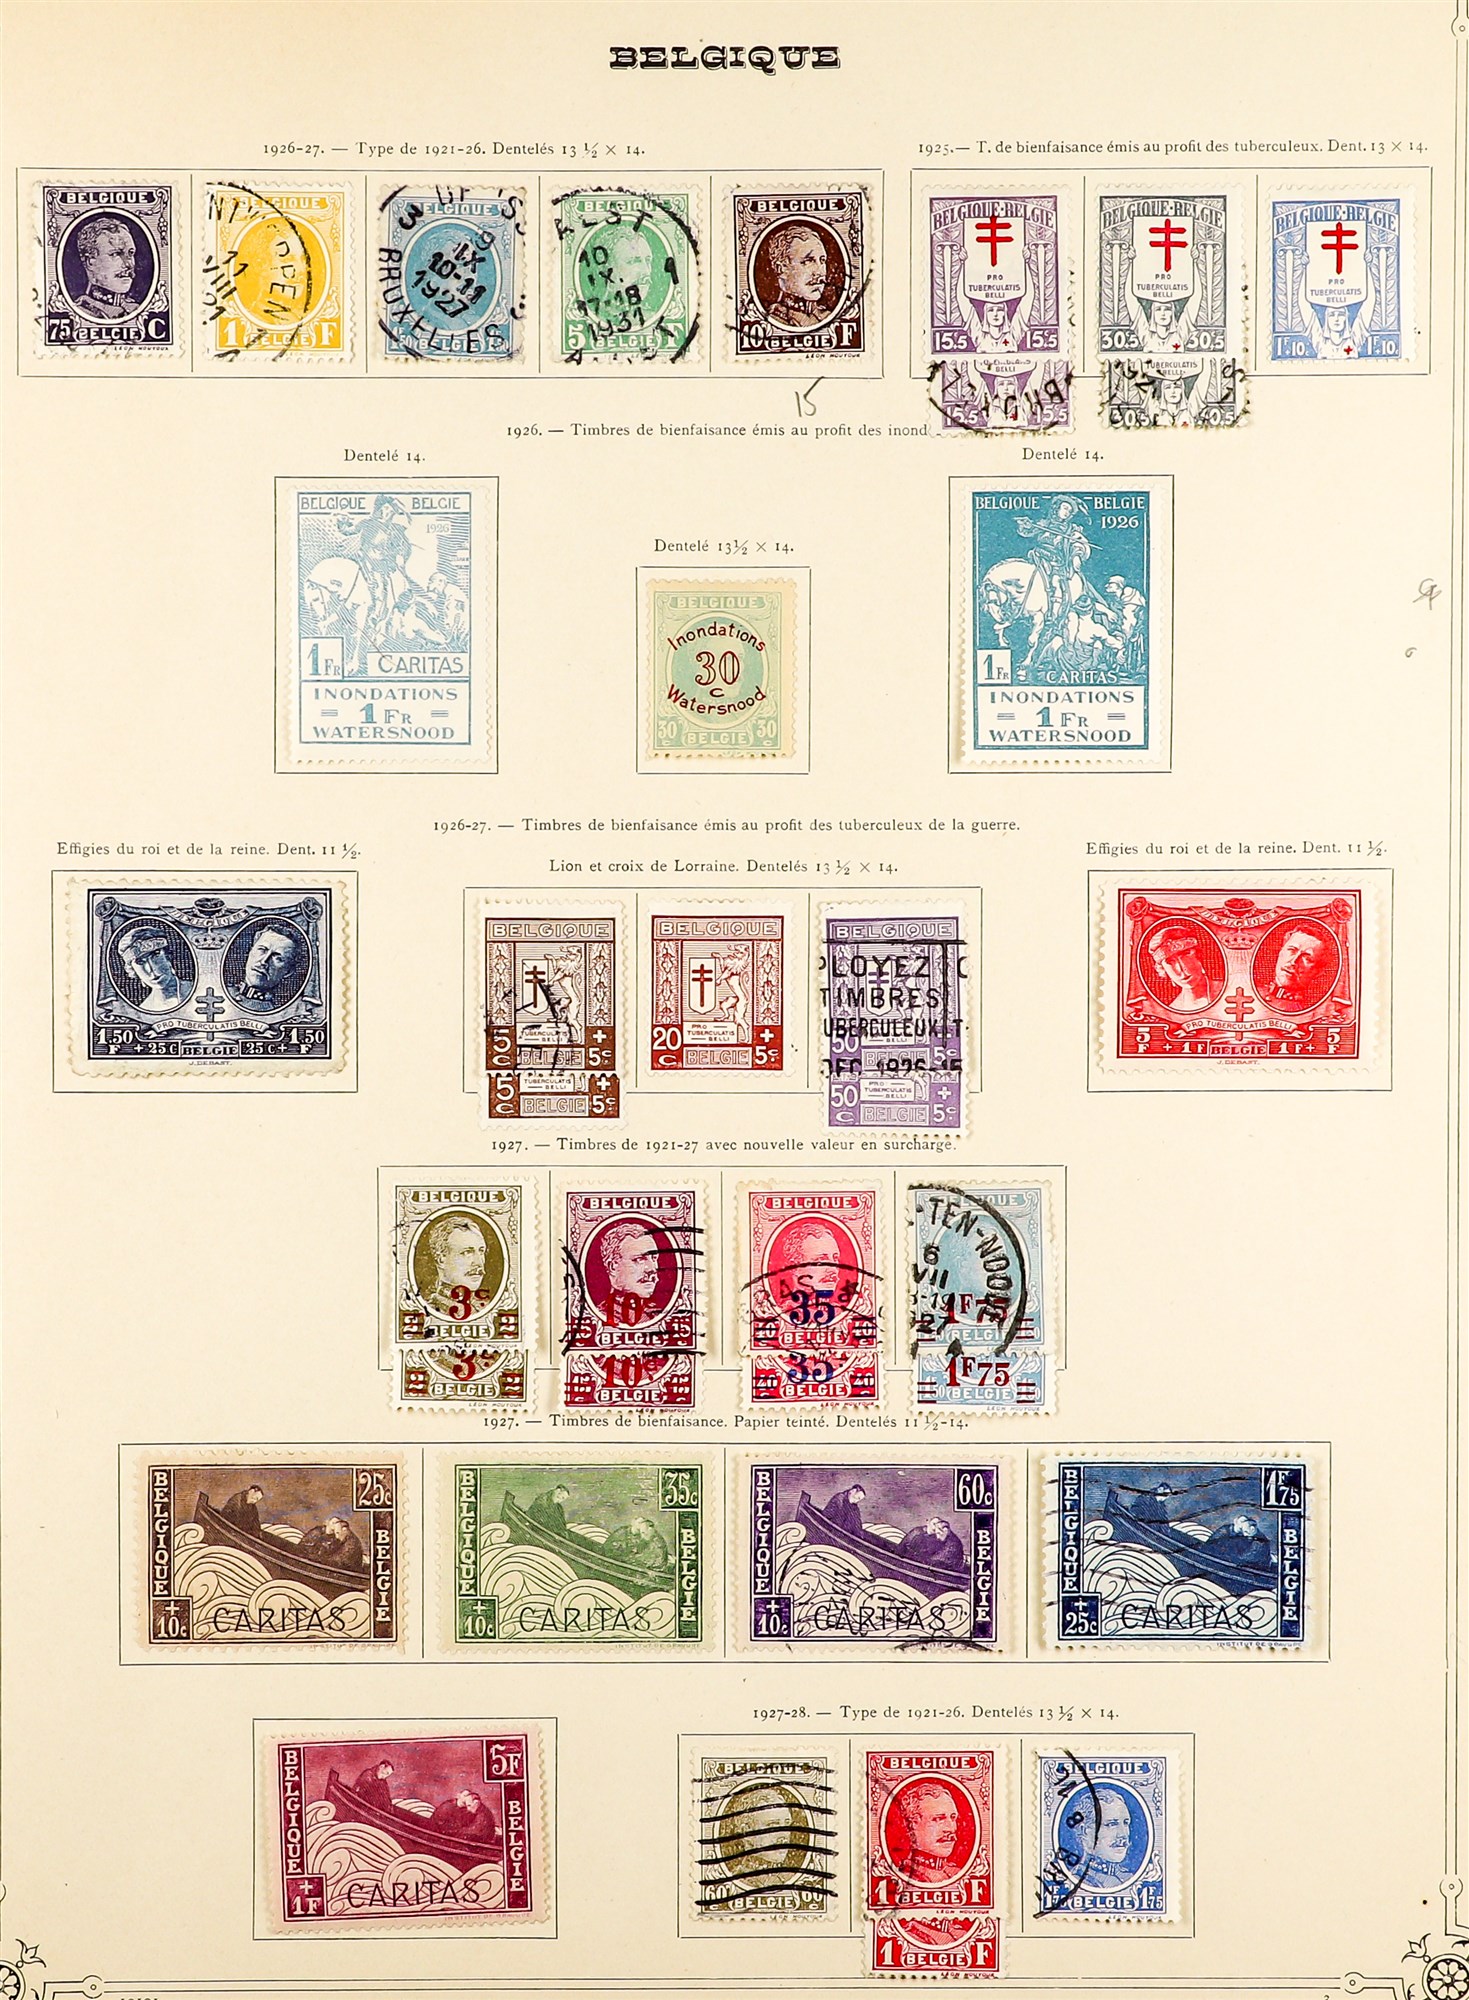 BELGIUM 1849 - 1942 COLLECTION of around 700 chiefly used stamps on album pages, comprehensive - Image 11 of 40